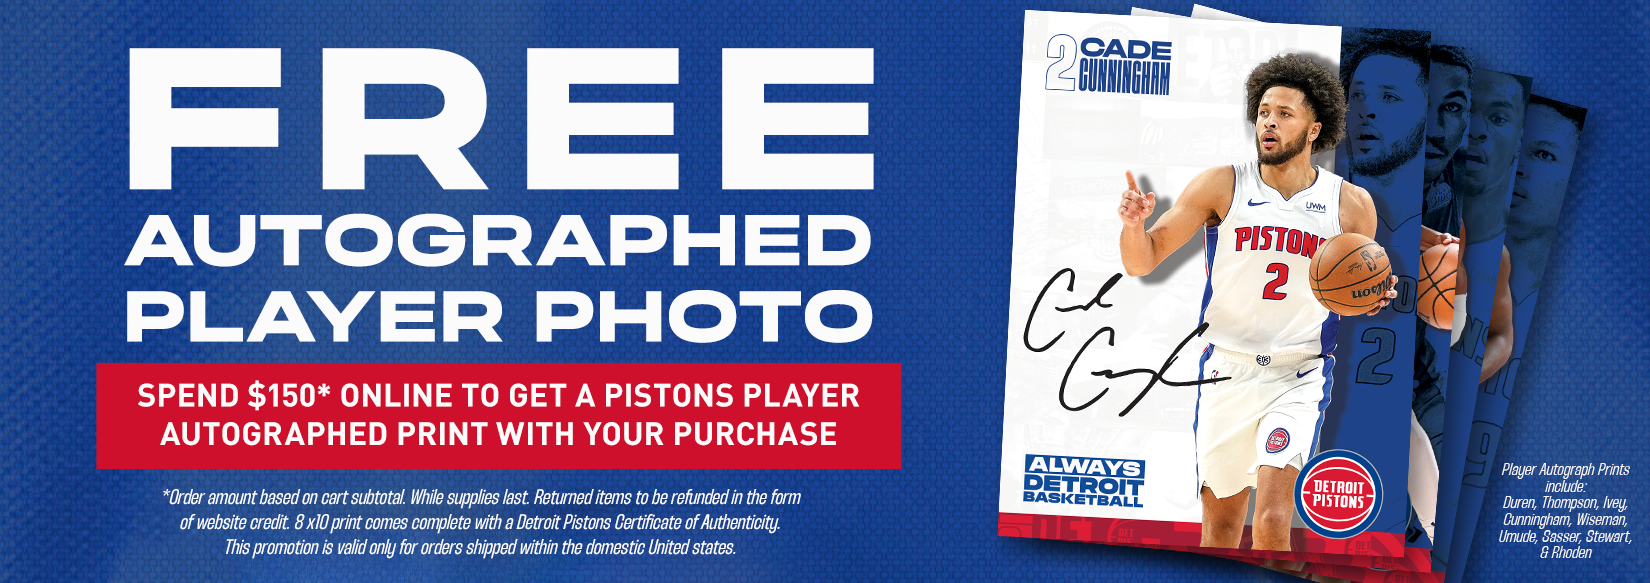 Score a FREE Autographed 8X10 Detroit Pistons Player Photo* with qualifying $150+ online orders!</strong> <strong>Limited offer – while supplies last.</strong> Each print comes with a Detroit Pistons Certificate of Authenticity and features signatures from top players like Duren, Thompson, Ivey, and more